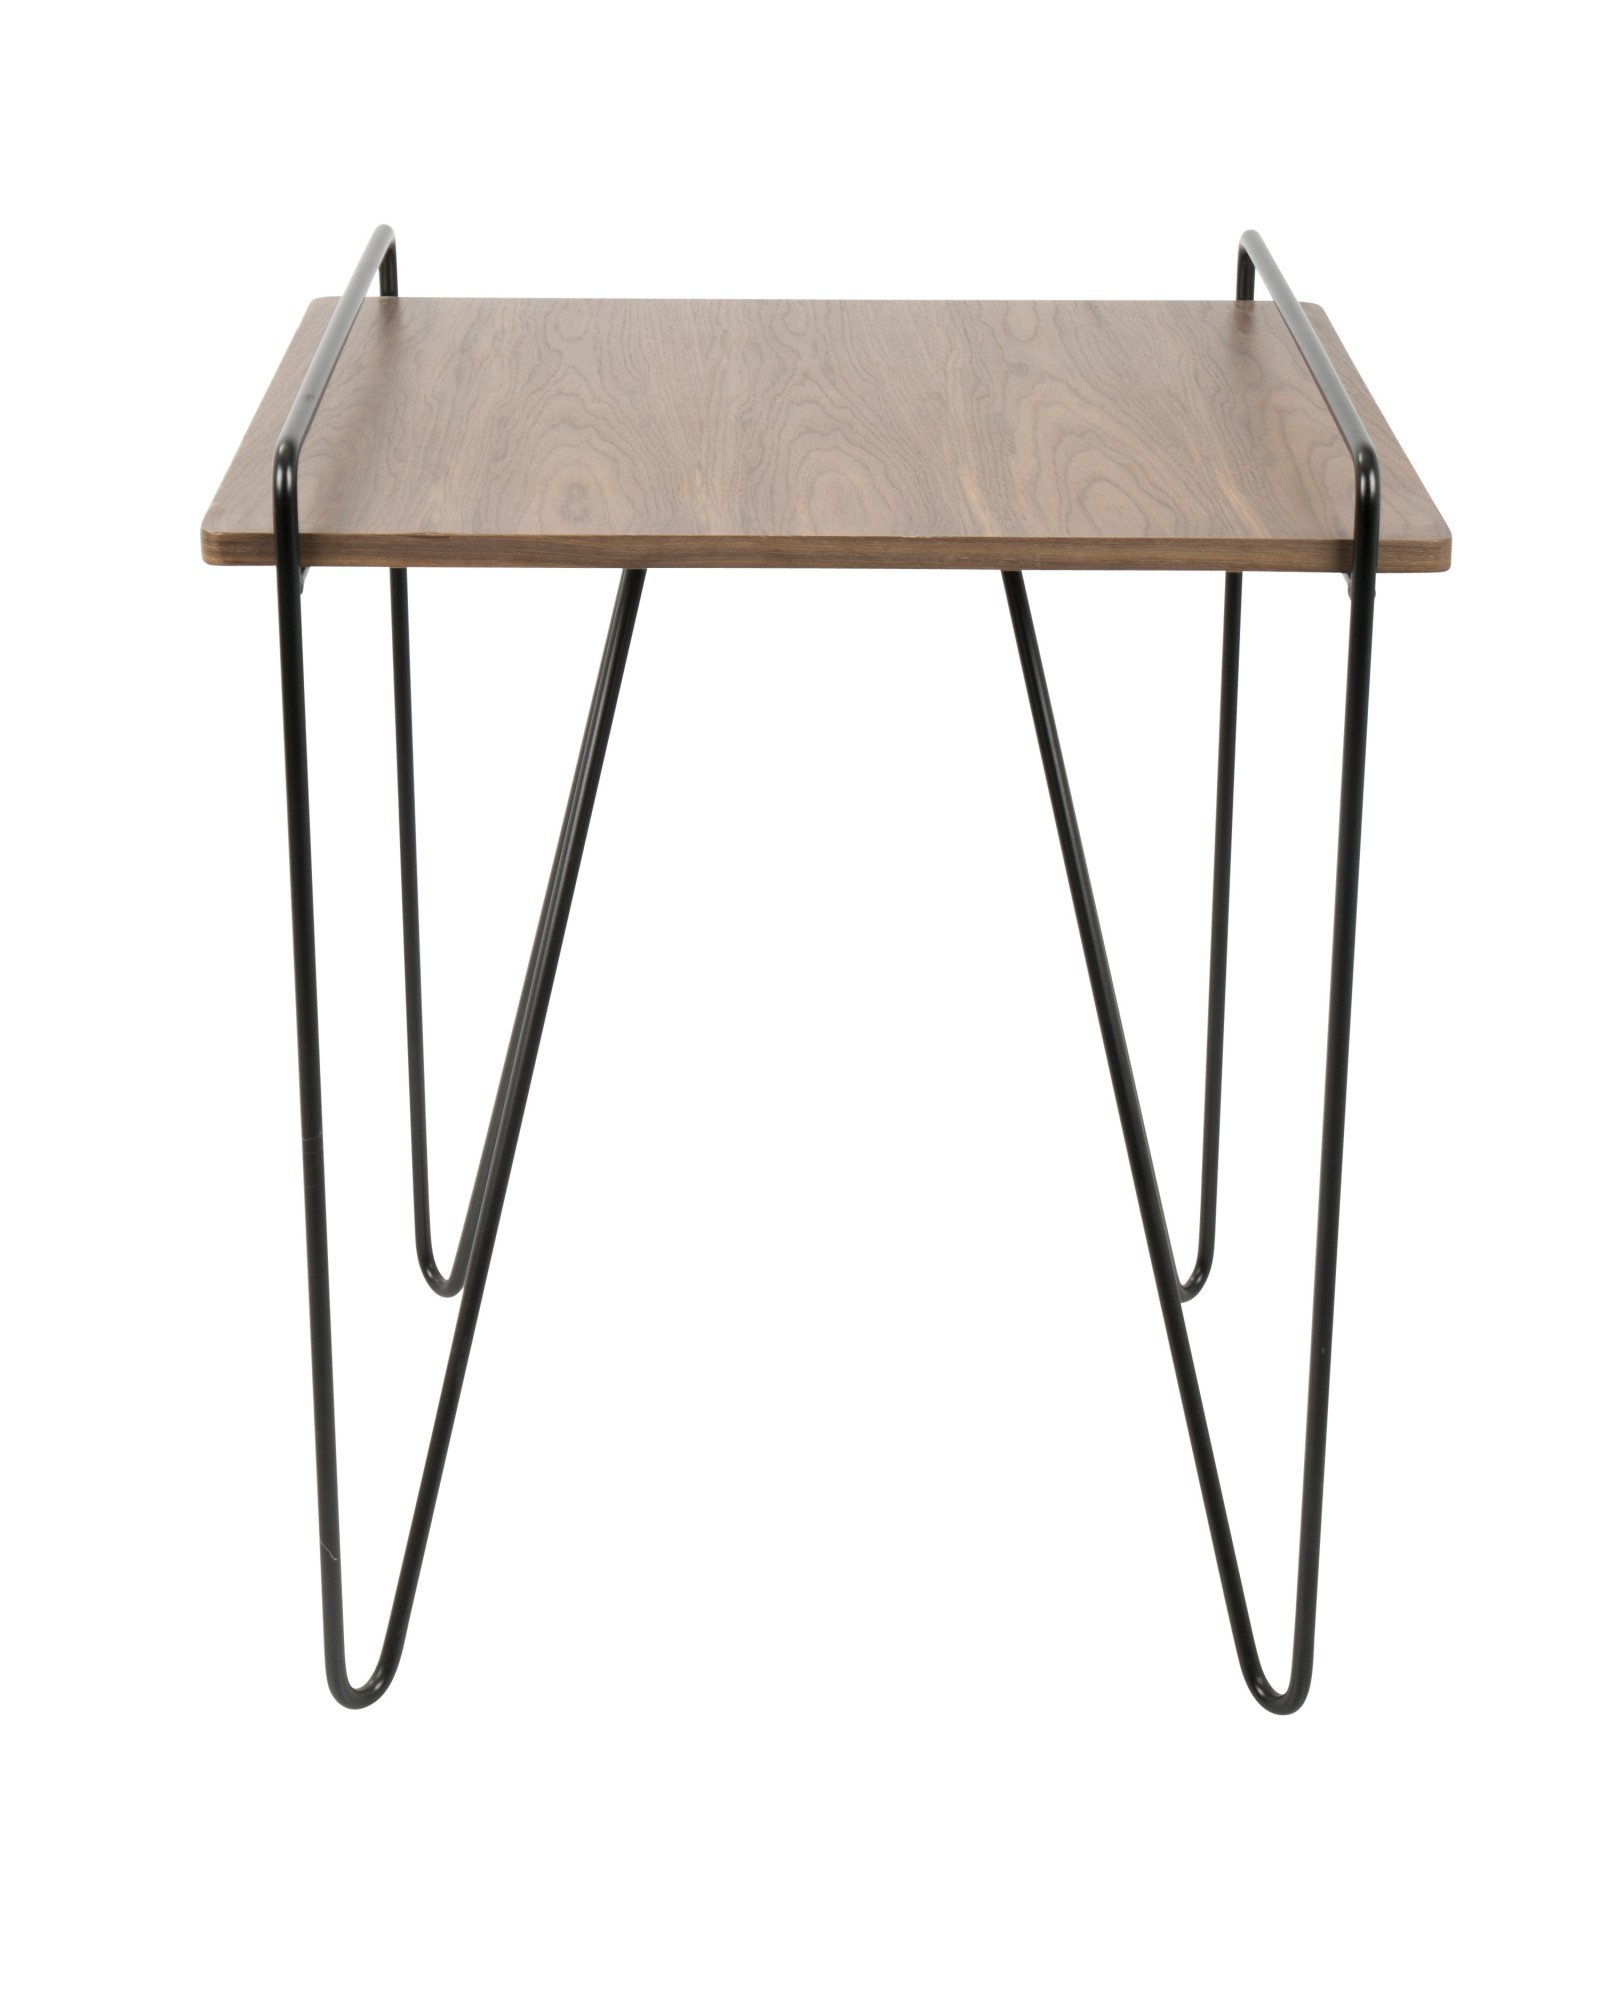 Loft Mid-Century Modern End Table in Walnut and Black